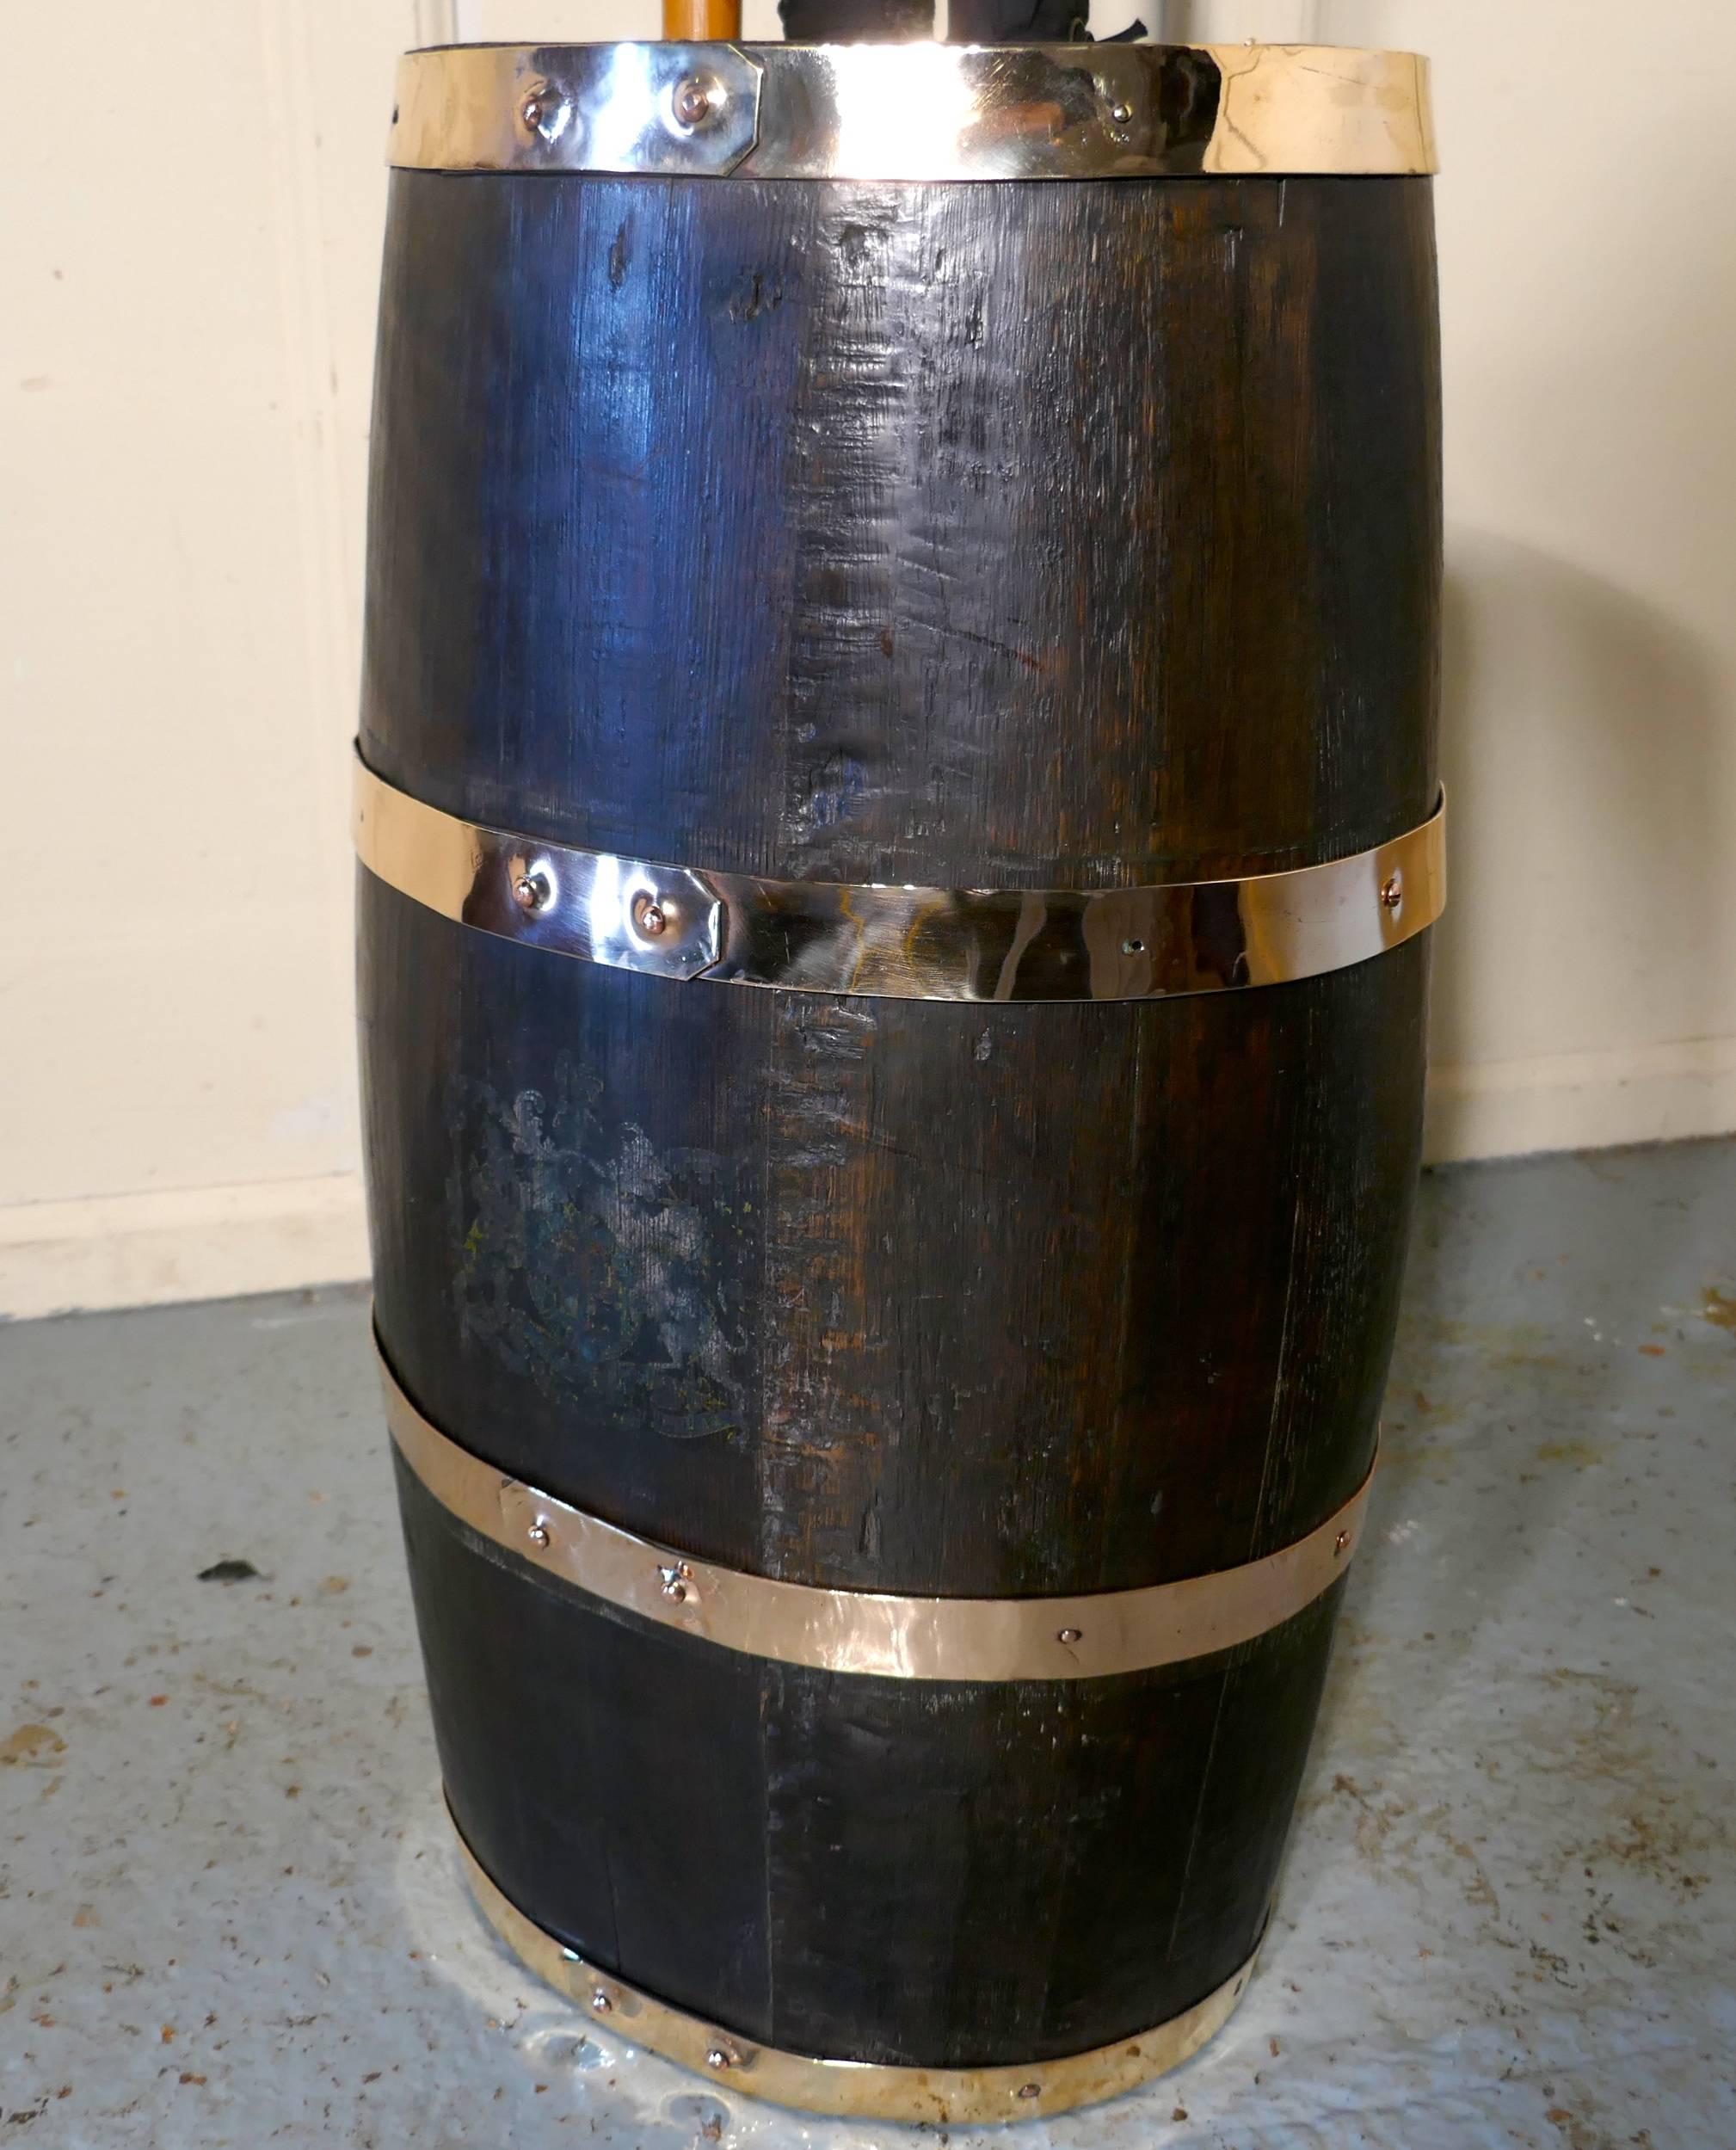 A large 18th century royal navy oak and brass bound powder barrel

This good looking piece originally used as a container for gun powder, it is oval in shape and made with oak staves and bound with four wide brass hoops
The royal coat of arms is